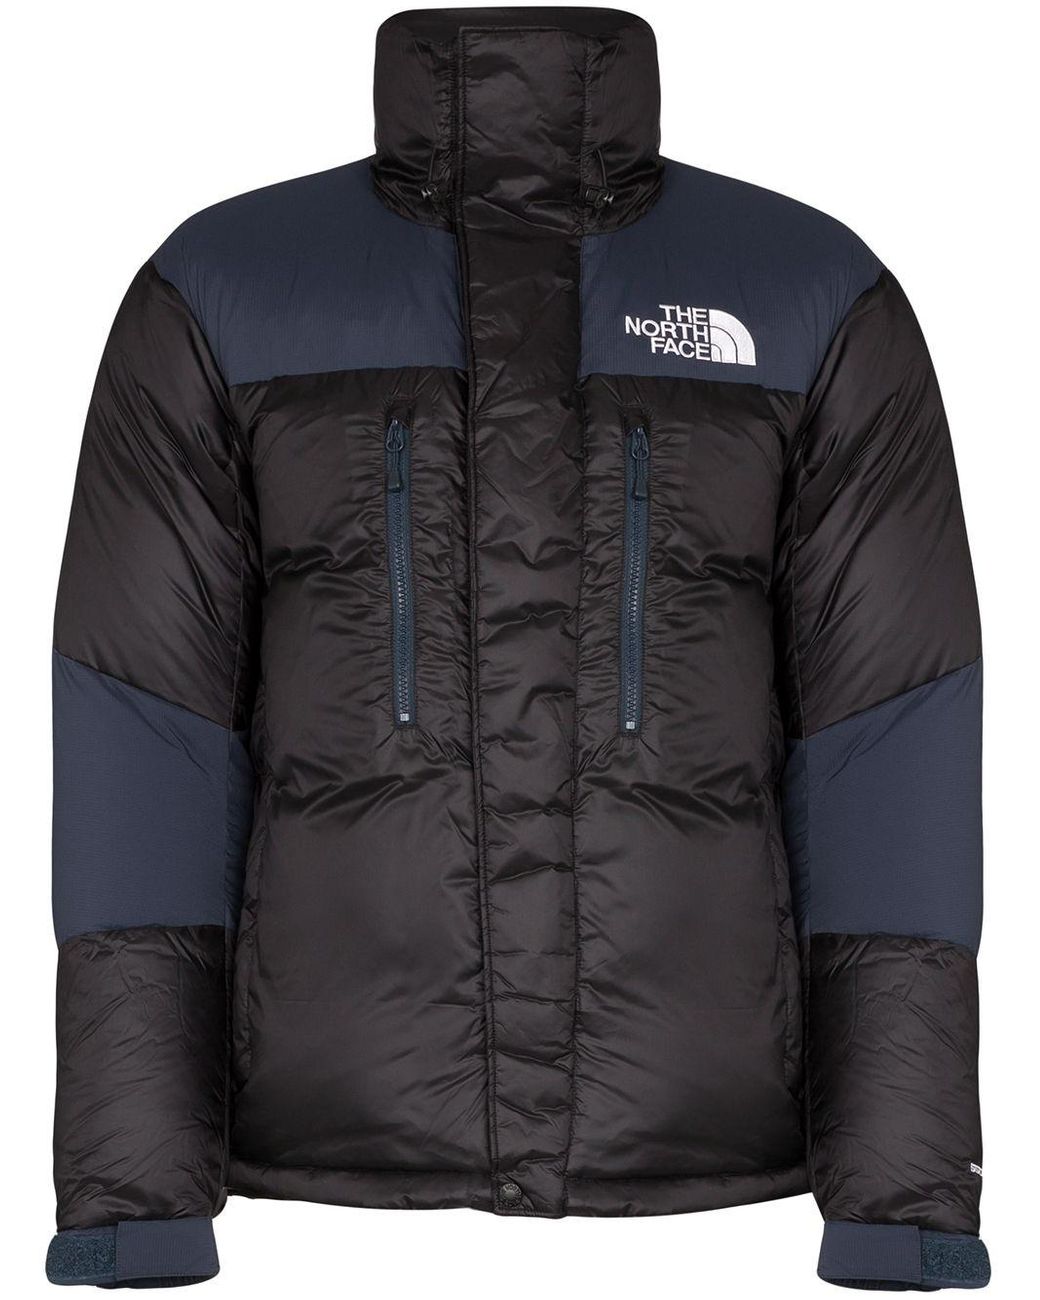 The North Face The North Face Label - Baltoro Puffer Jacket in Black ...